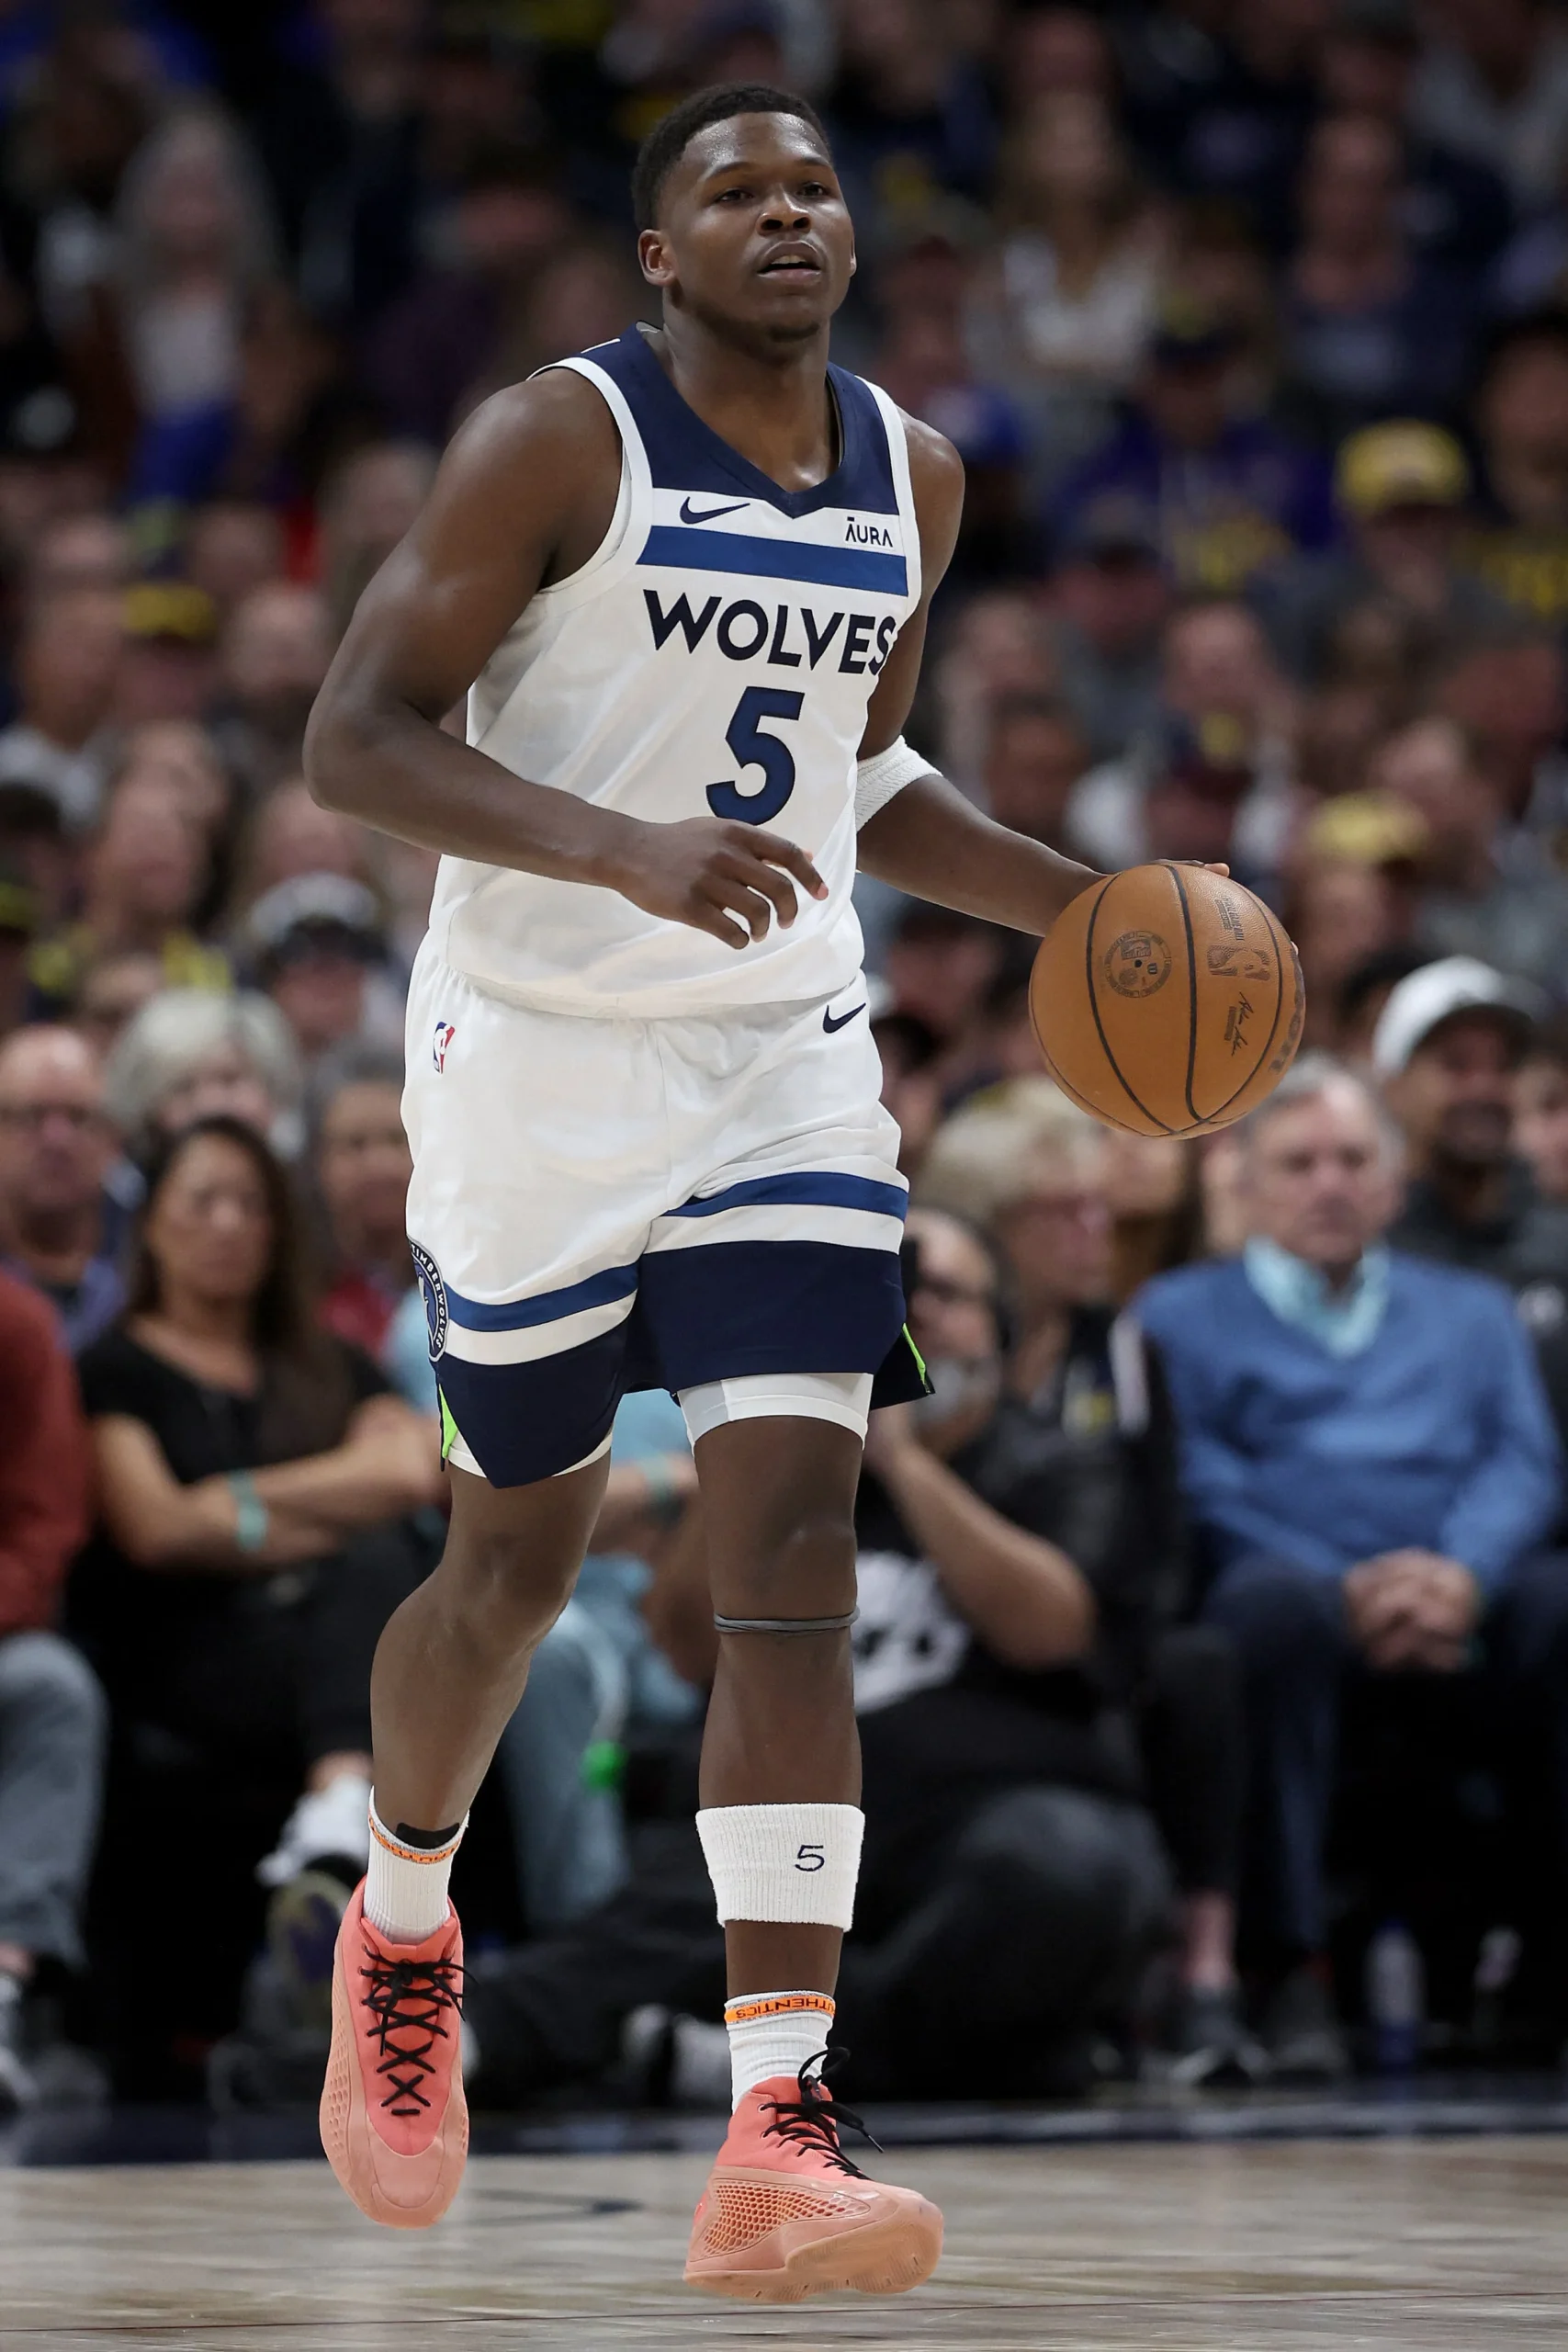 Edwards, Timberwolves to Make Even Bettor Statement in Game 3